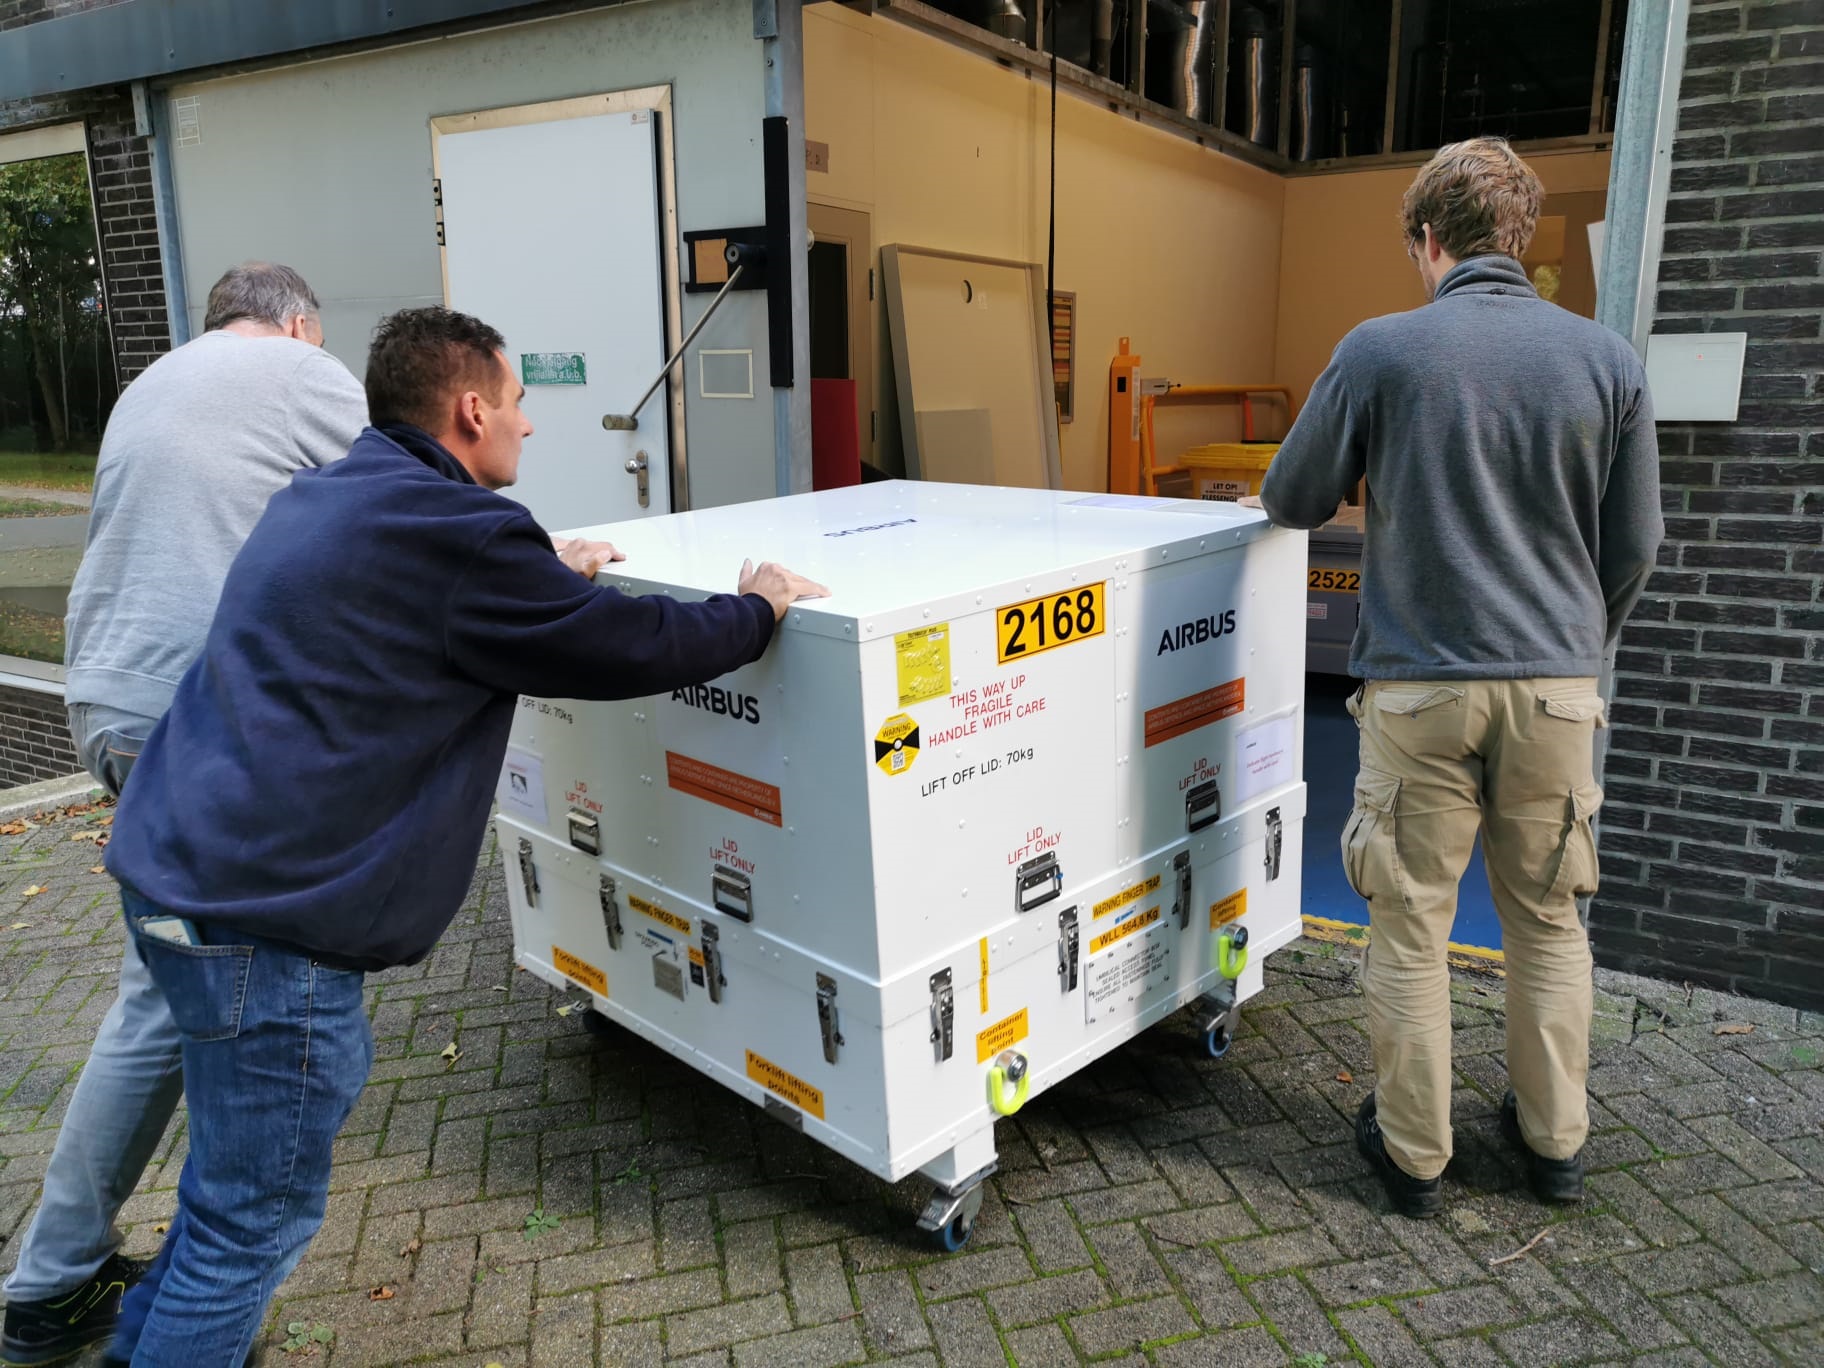 SPEXone arriving at SRON in its shipping container, post environmental testing